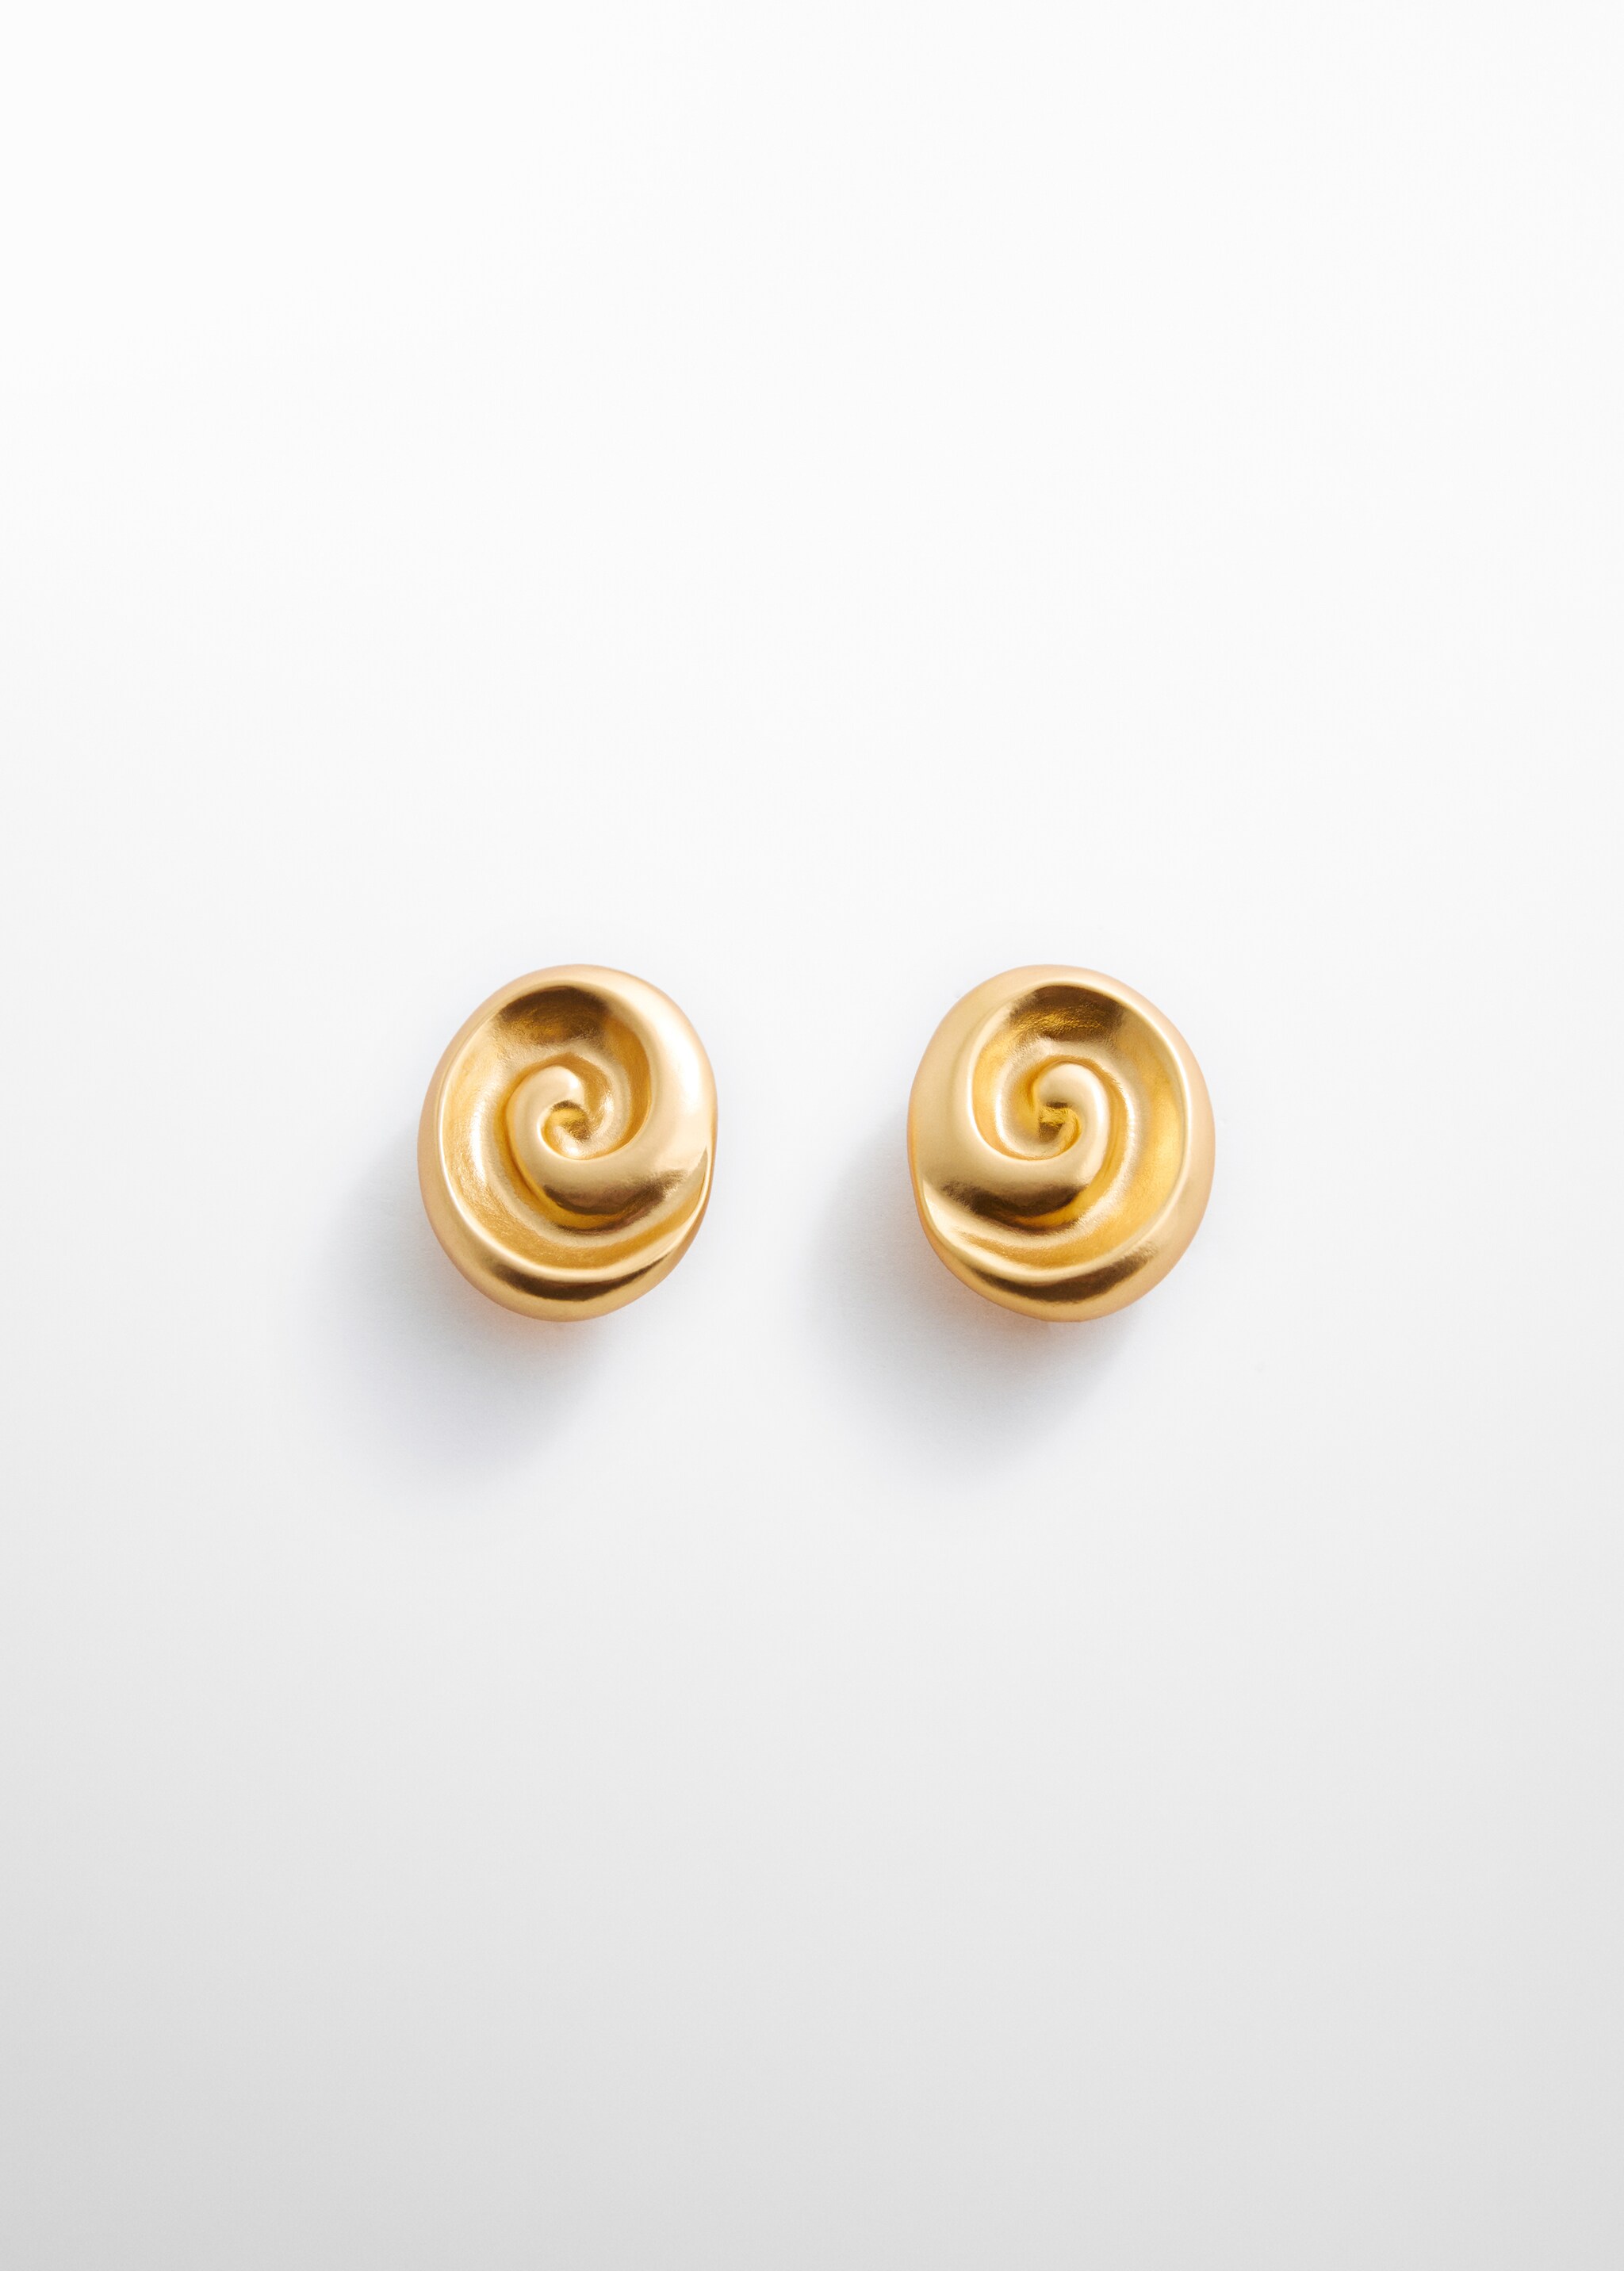 Round spiral earrings - Article without model